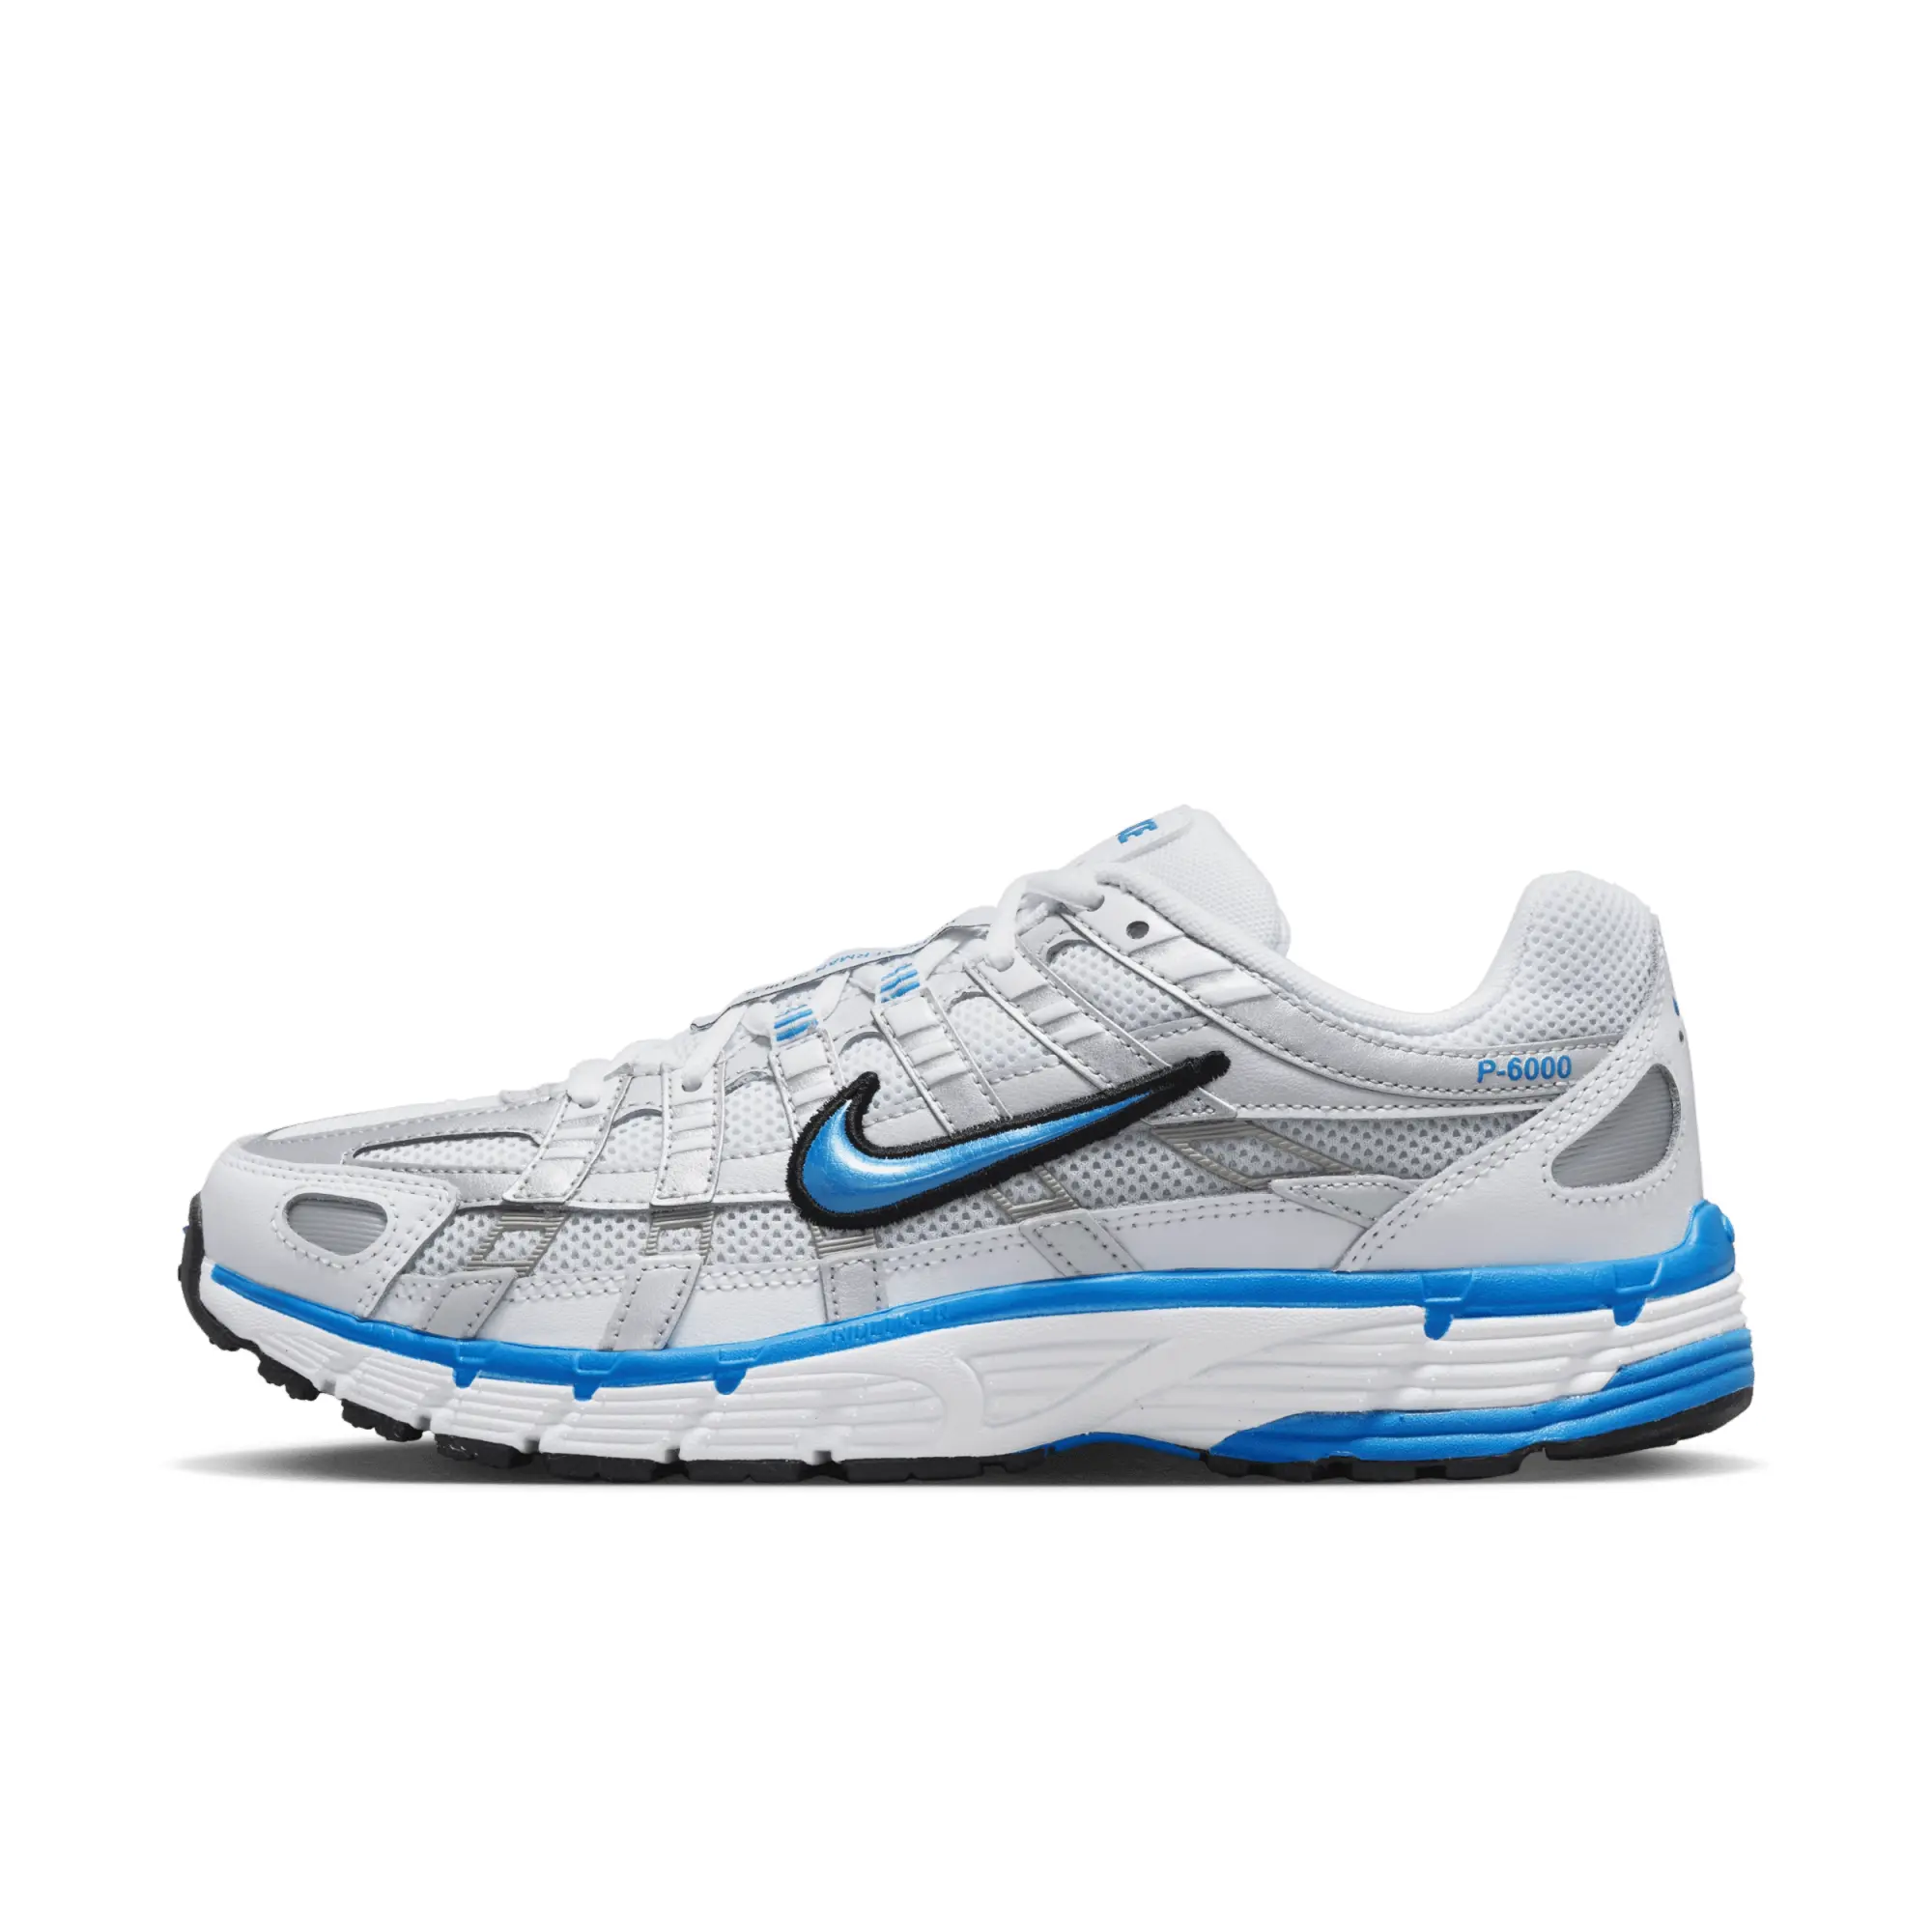 Nike P-6000 Trainers In Silver And Blue